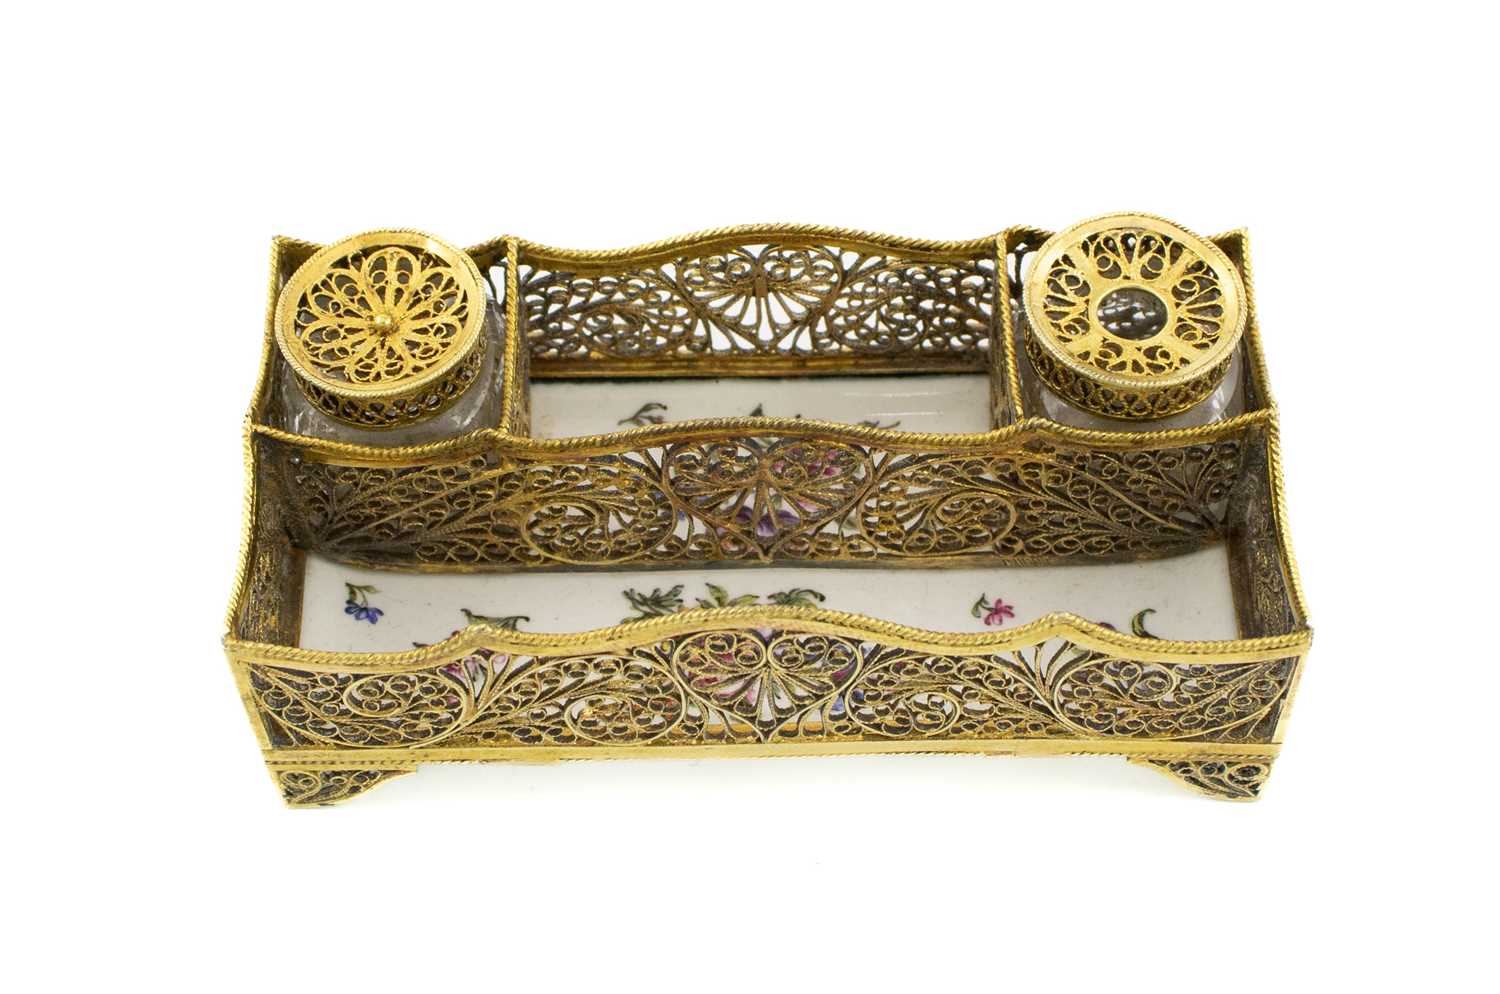 A late-18th/early-19th century silver-gilt filigree and enamel inkstand, unmarked, circa 1800, - Image 2 of 2